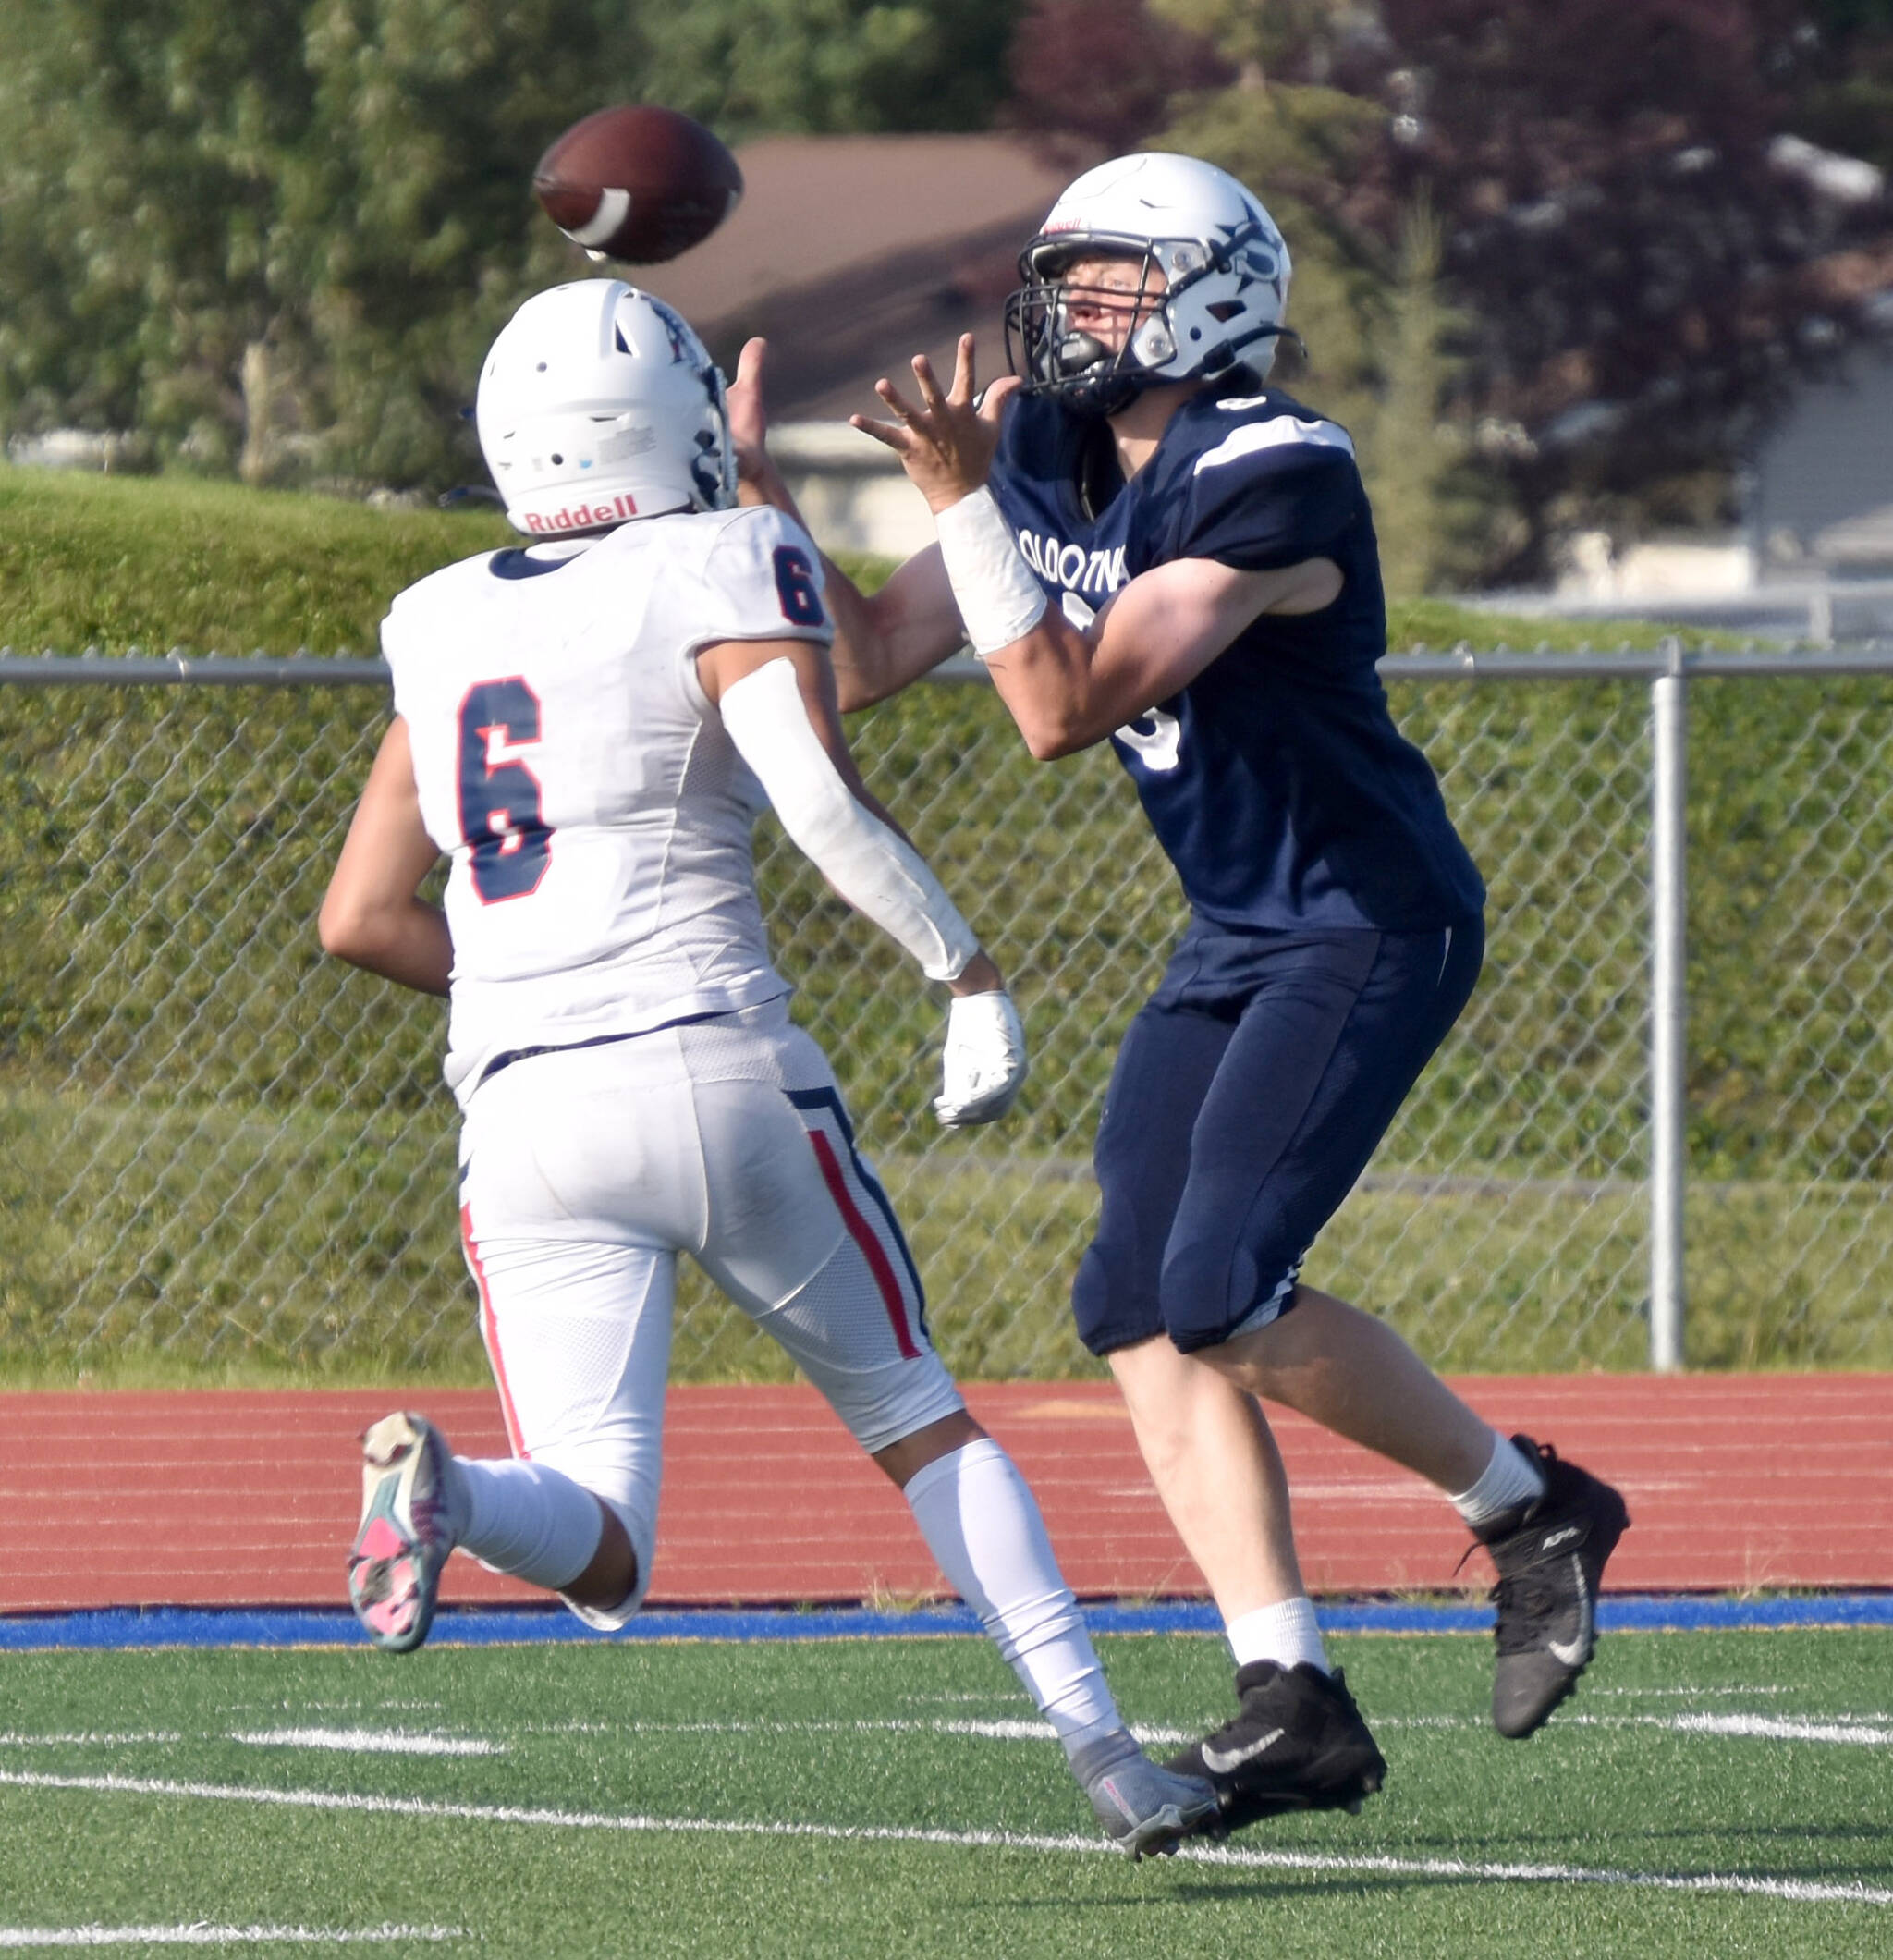 Soldotna’s Andrew Pieh catches a pass in front of North Pole’s Korbin Wallace on Friday, Aug. 18, 2023, at Justin Maile Field at Soldotna High School in Soldotna, Alaska. (Photo by Jeff Helminiak/Peninsula Clarion)